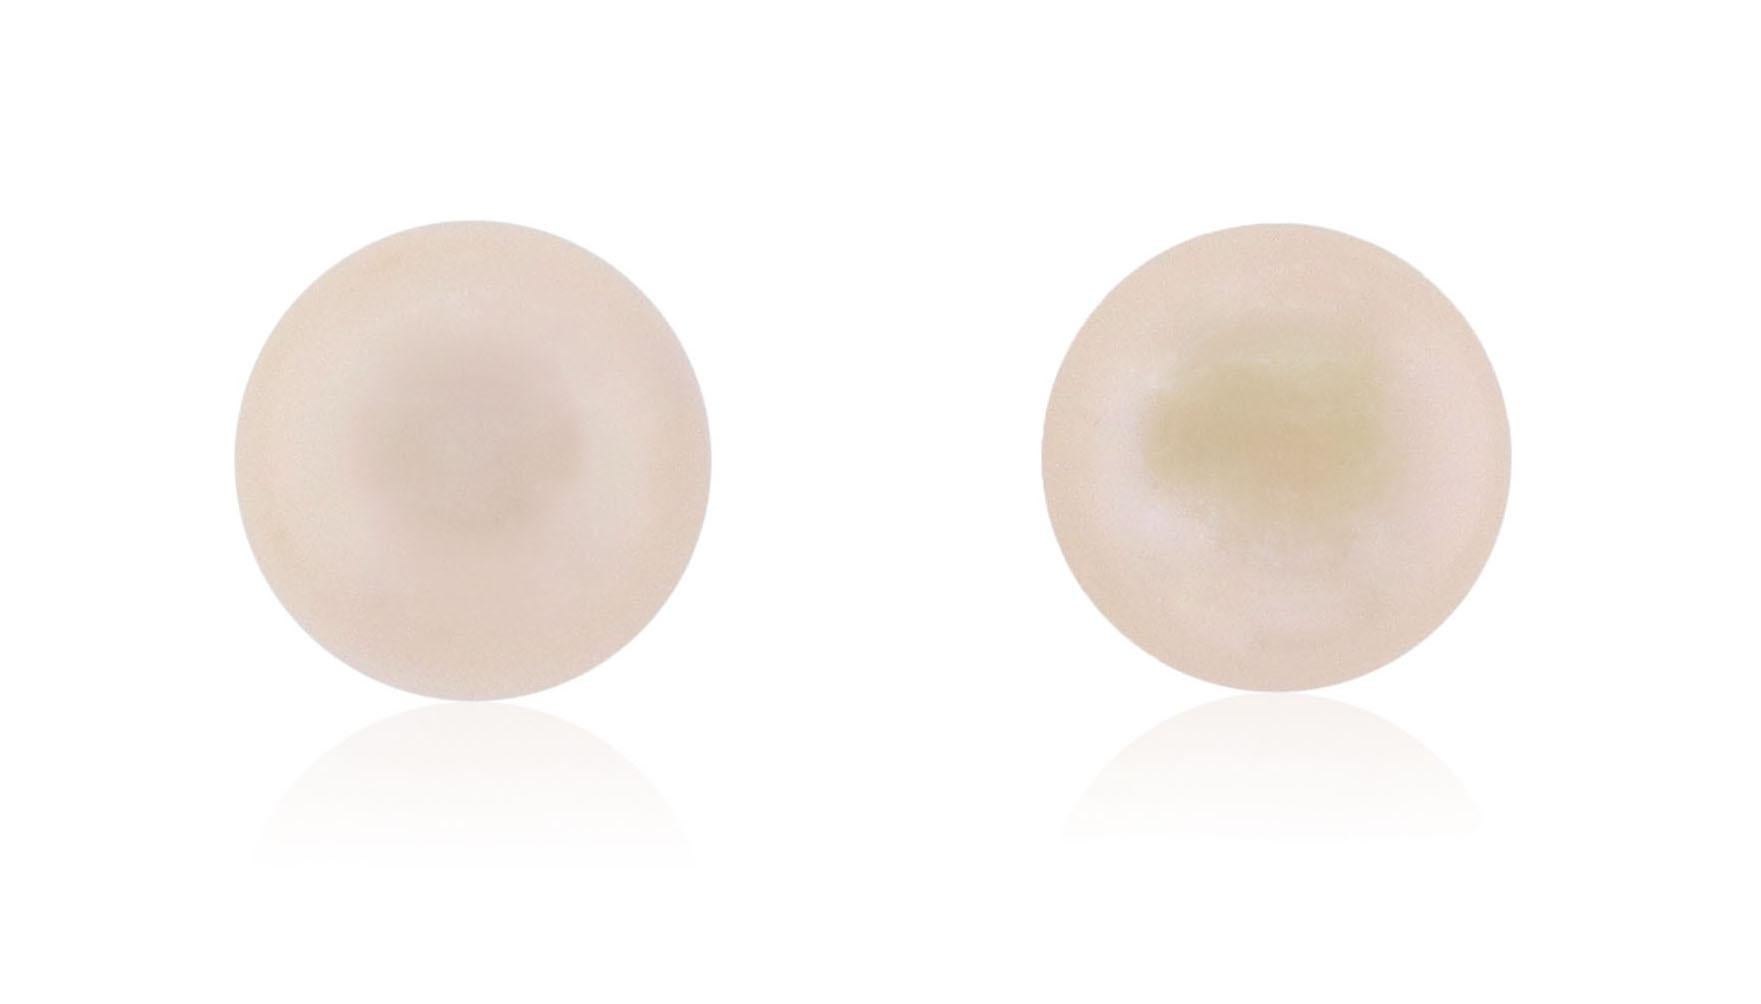 Material: Silver
Details: 2 White Round Freshwater Pearls measuring 12 millimeters each.
Push back studs

Fine one-of-a-kind craftsmanship meets incredible quality in this breathtaking piece of jewelry.